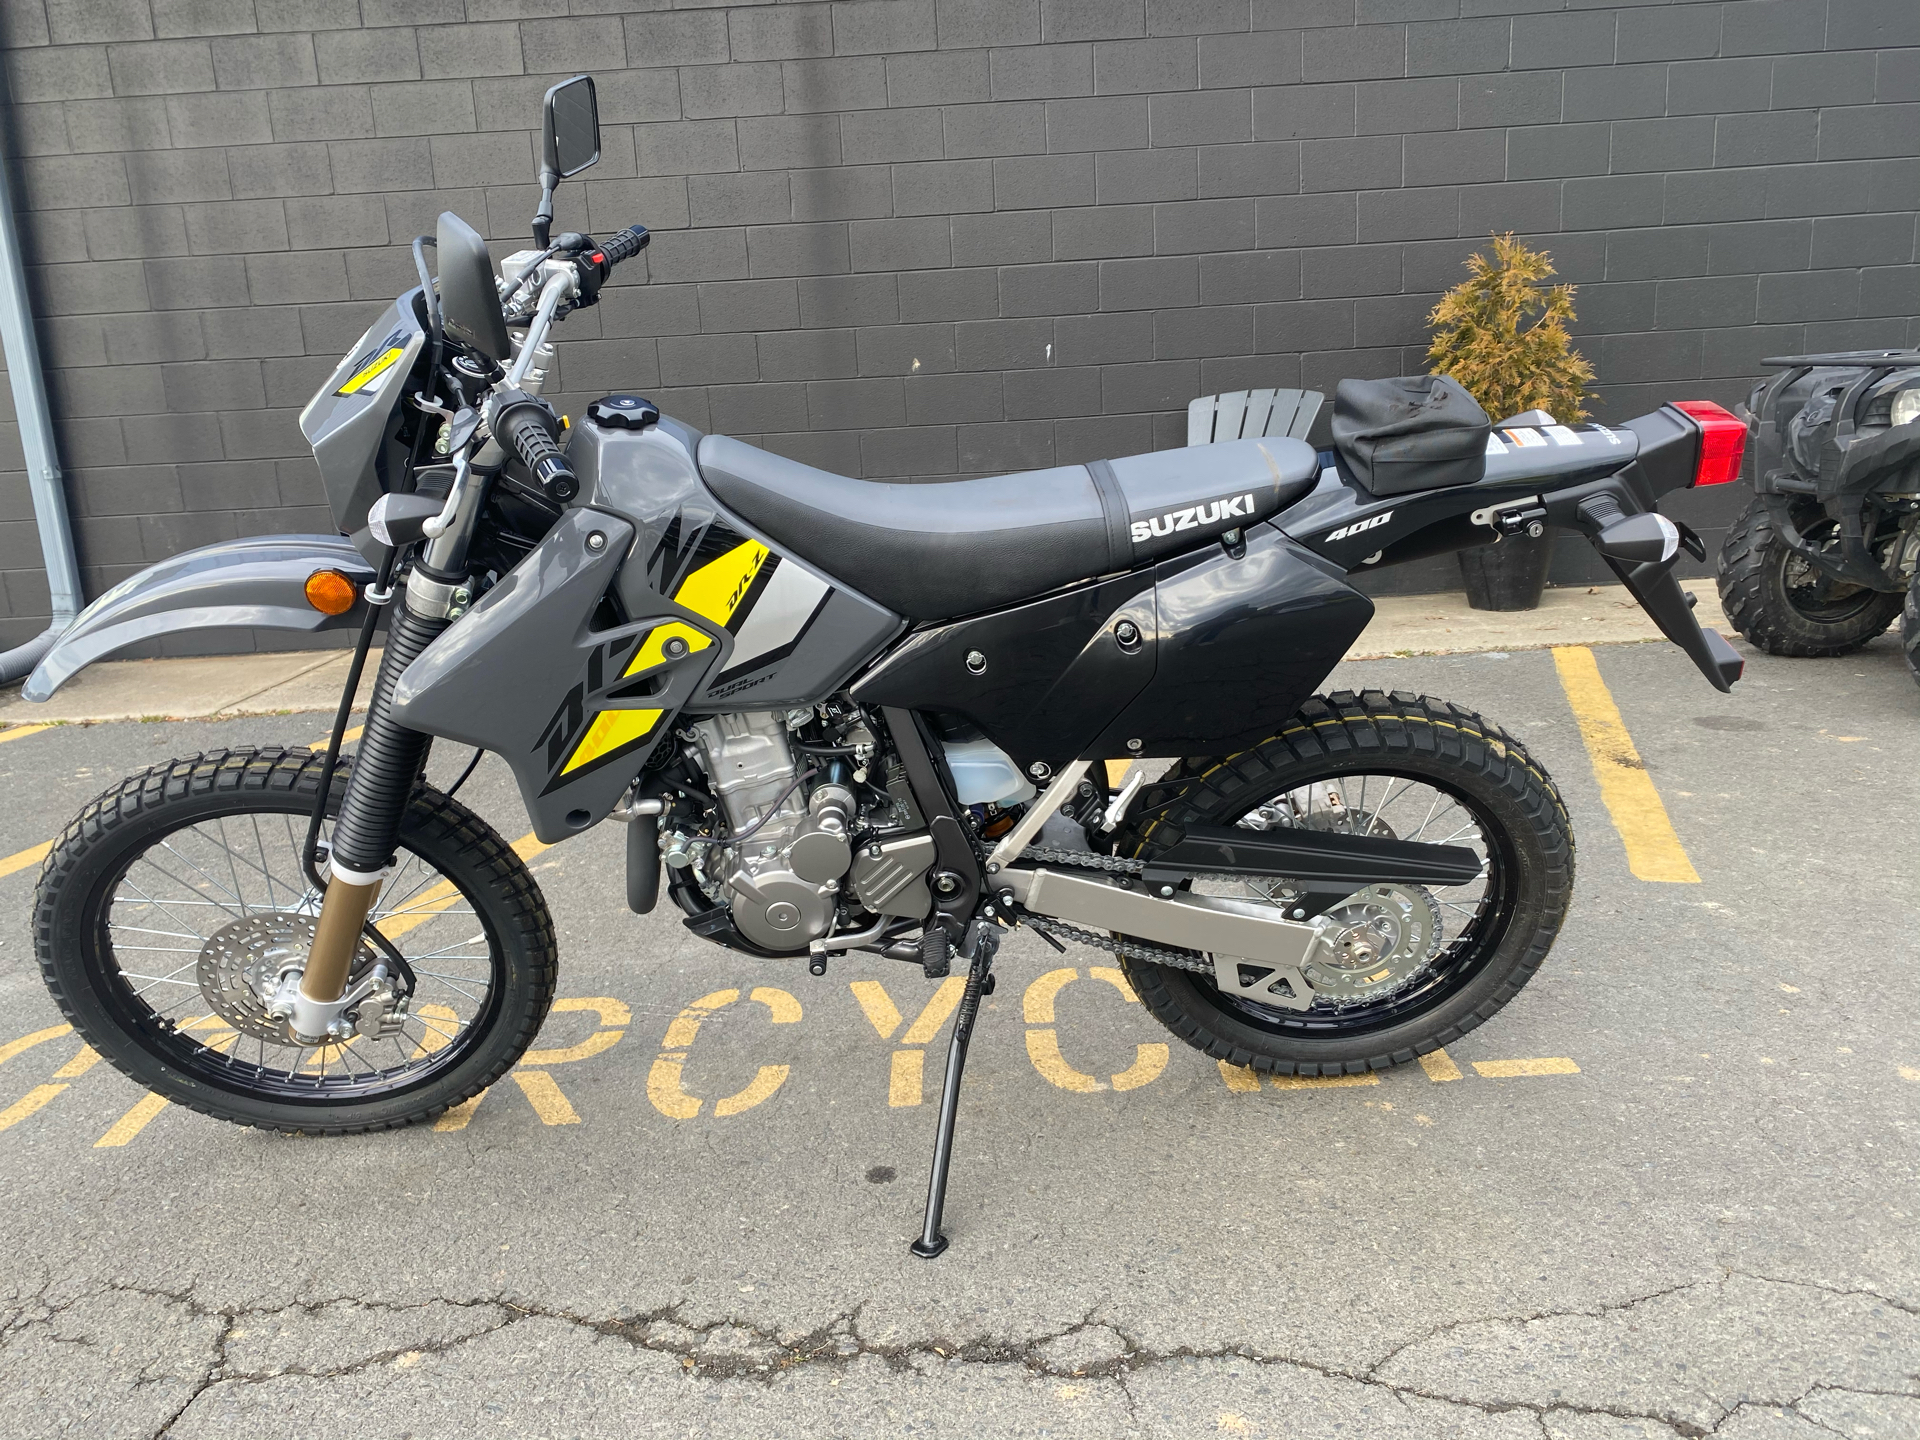 New 2021 Suzuki Dr Z400s Solid Iron Gray Solid Black Motorcycles In Albemarle Nc N A